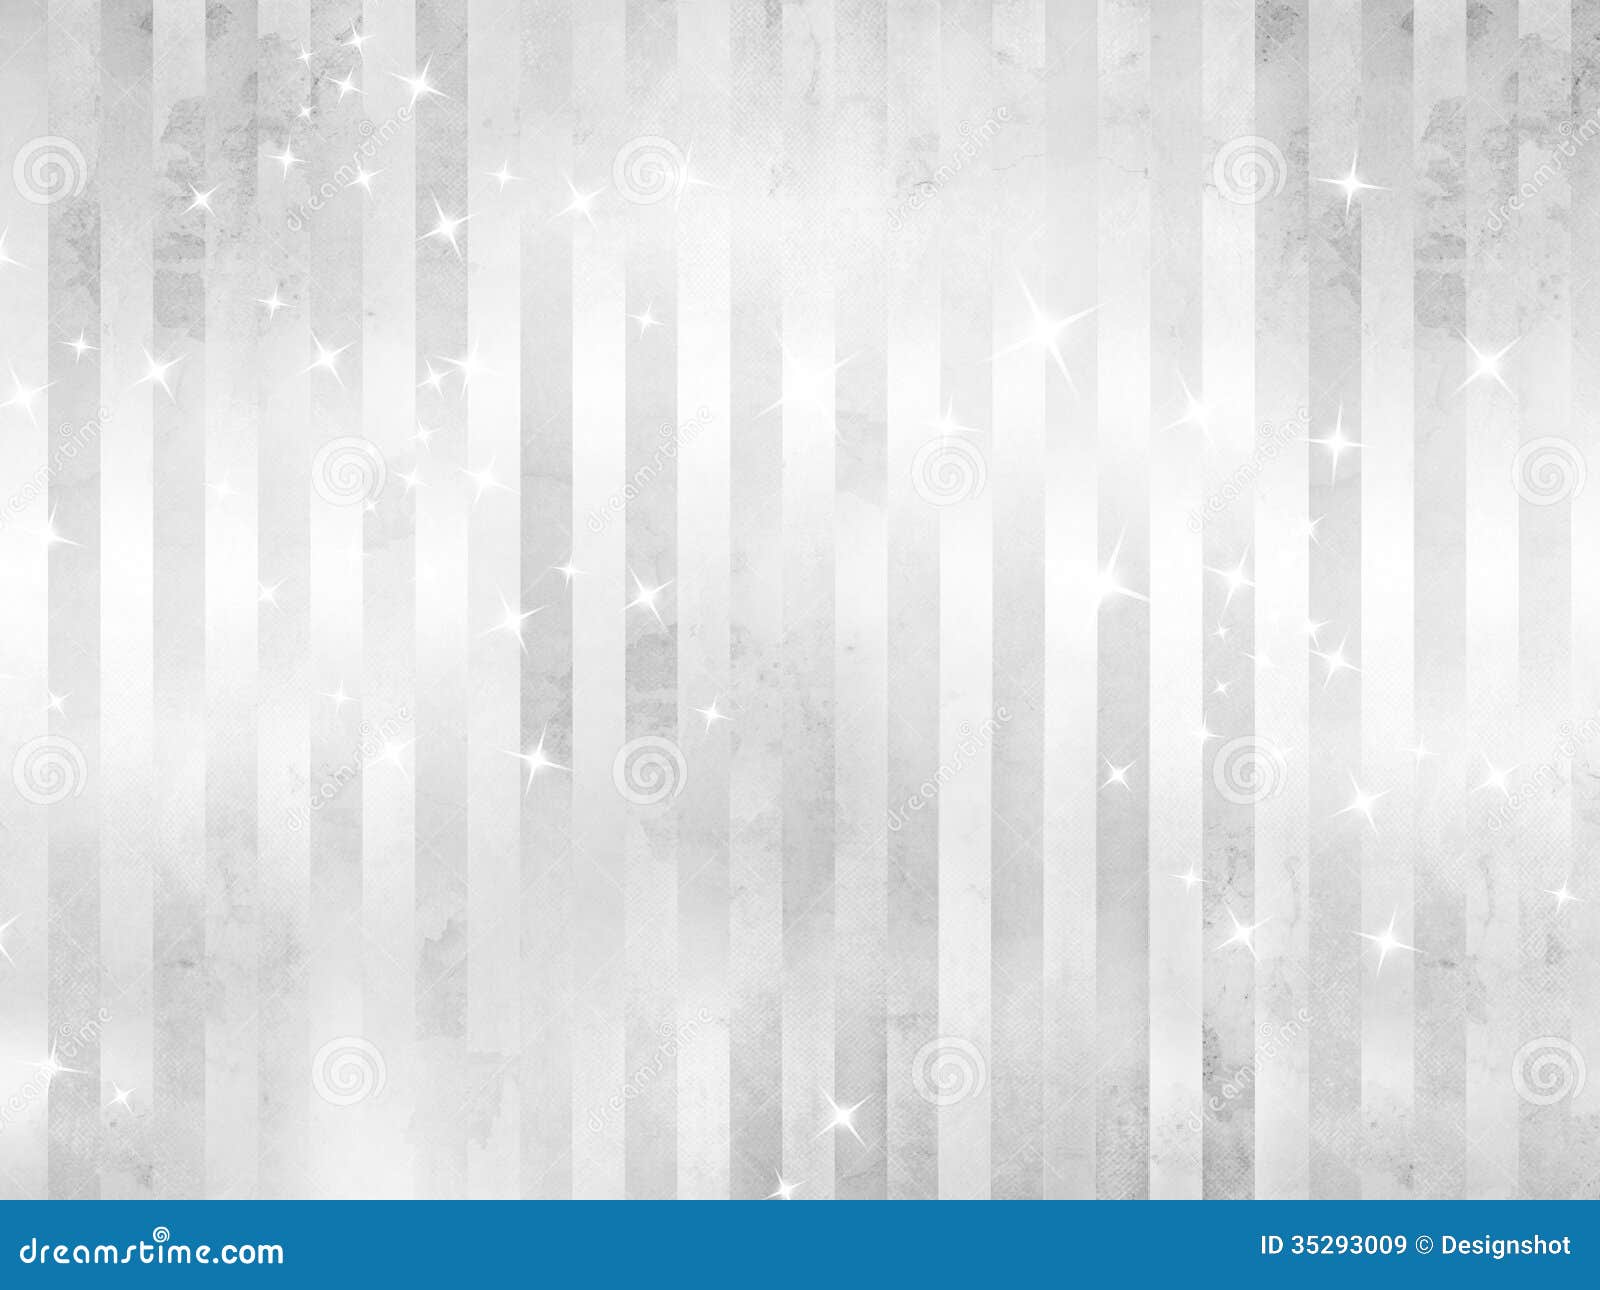 White Sparkles - Silver Background Royalty Free Stock Images - Image